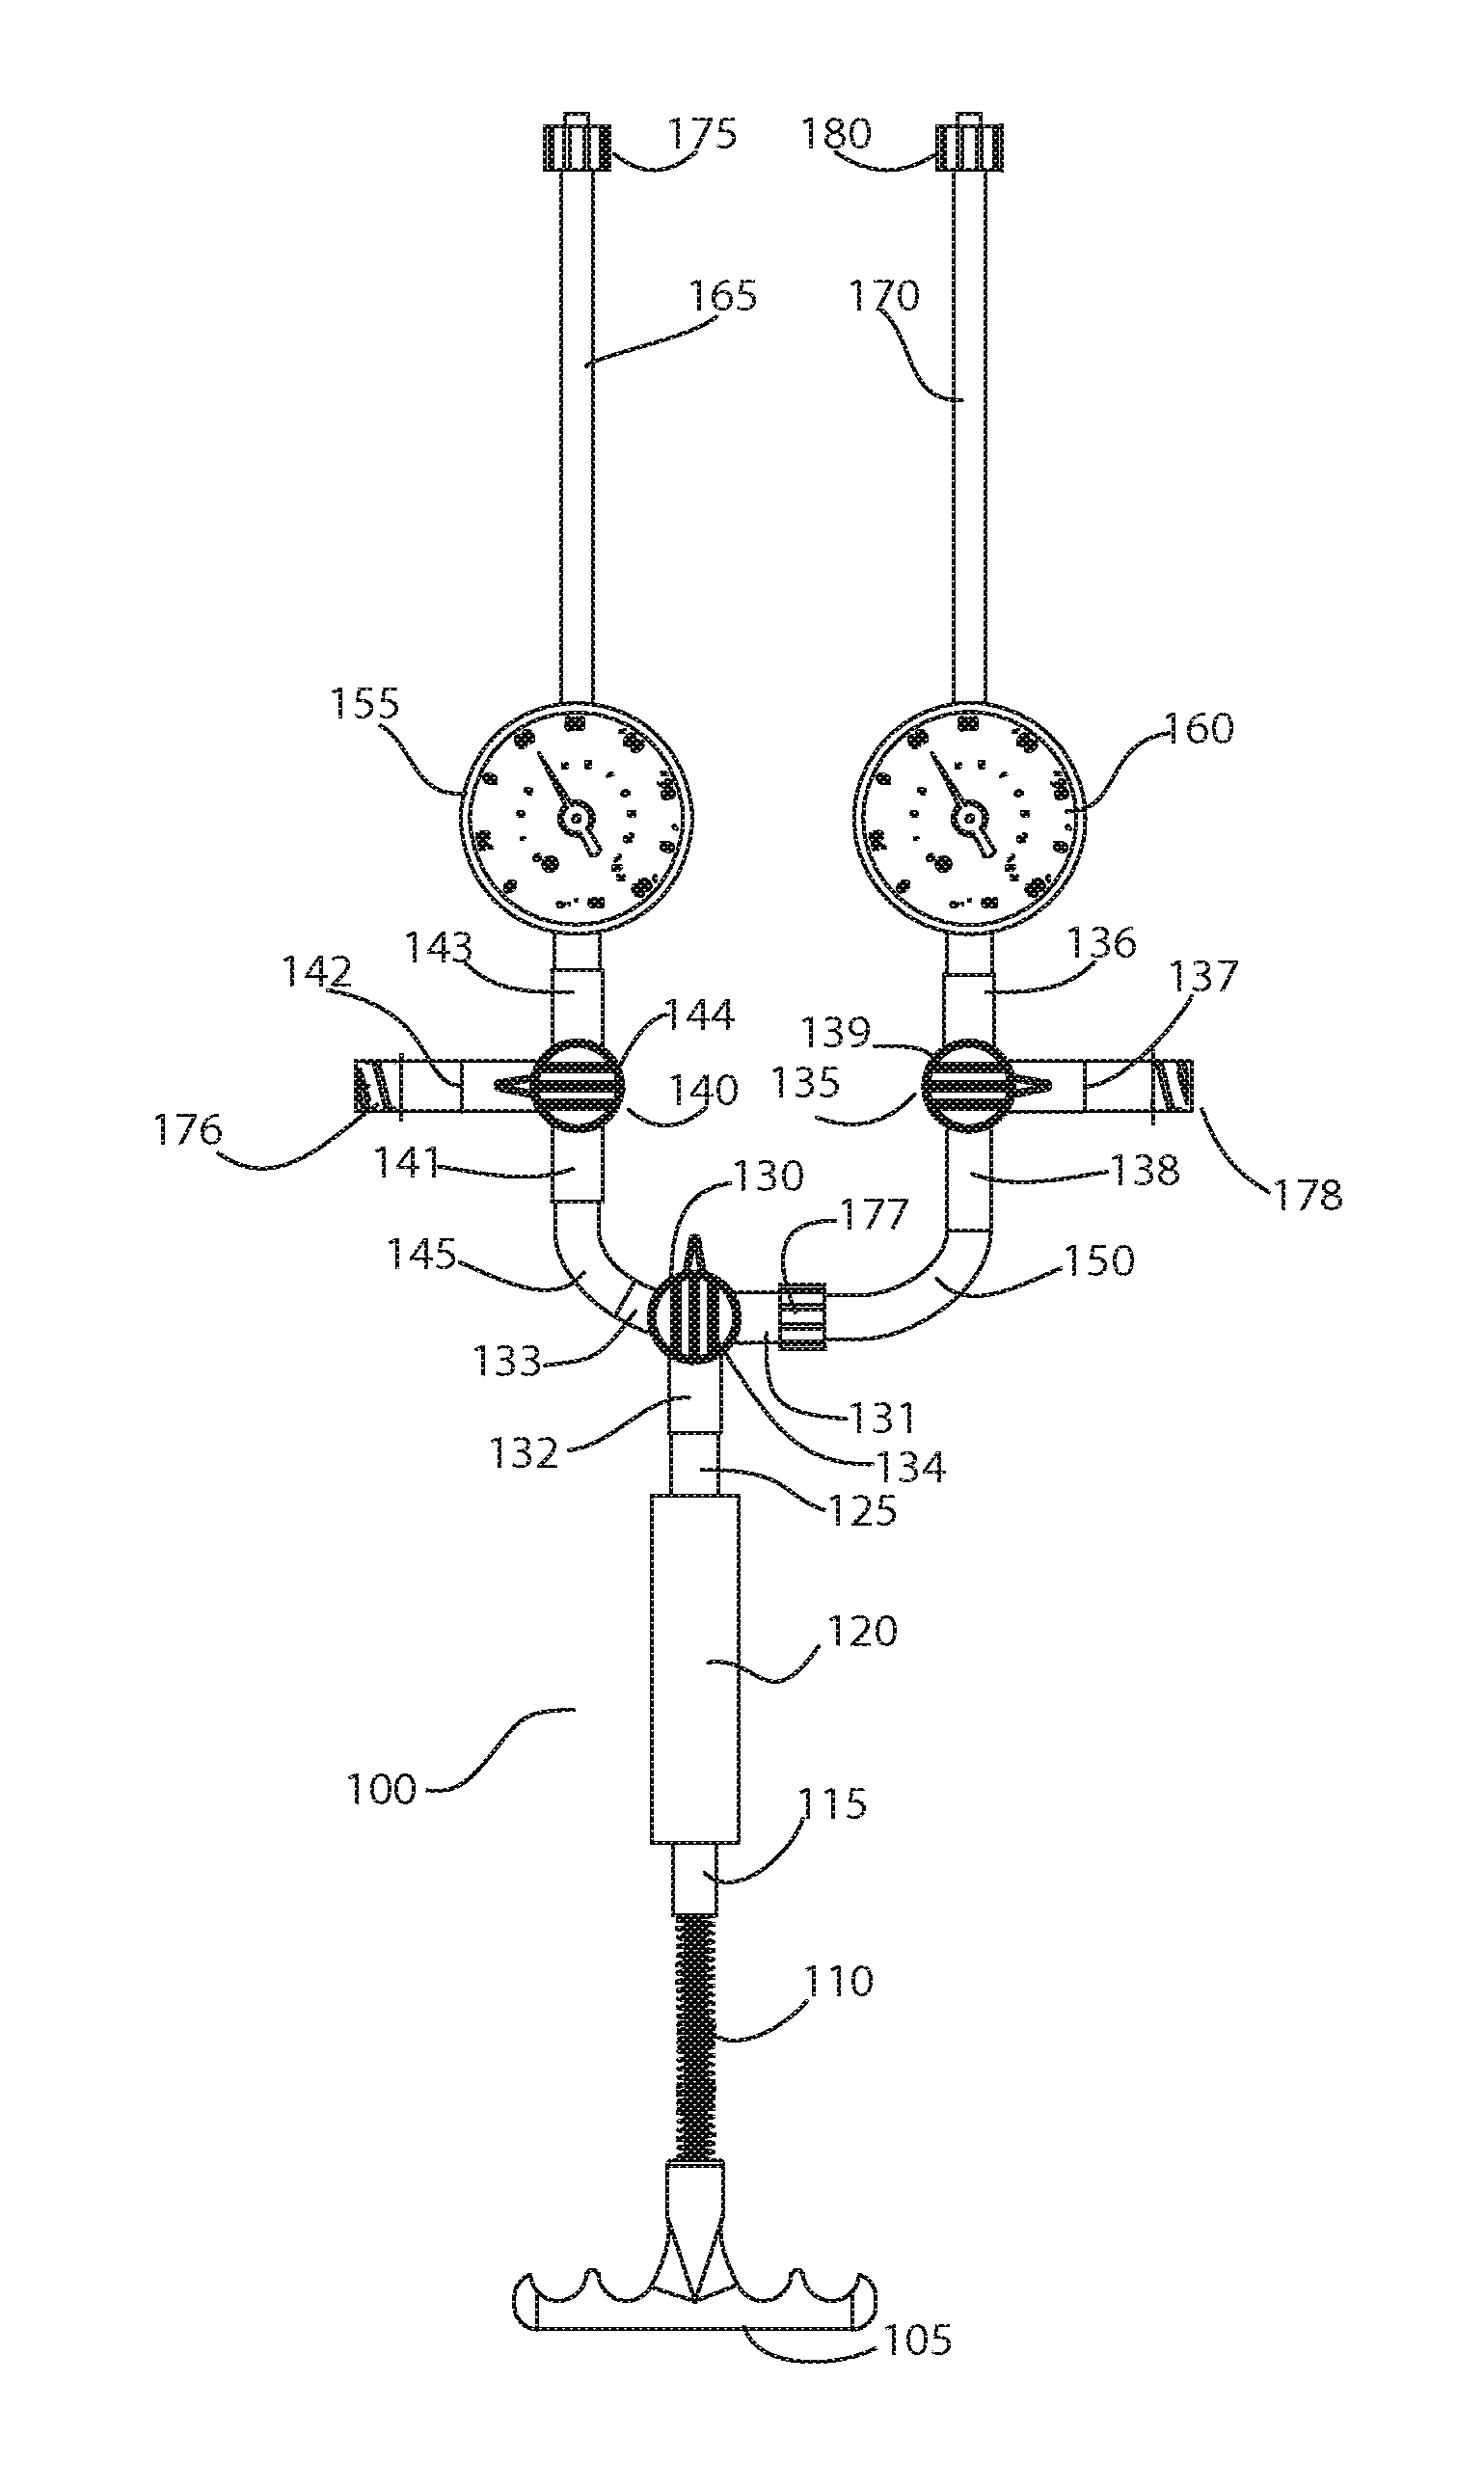 Expandable device for independently inflating, deflating, supplying contrast media to and monitoring up to two balloon catheters for angioplasty